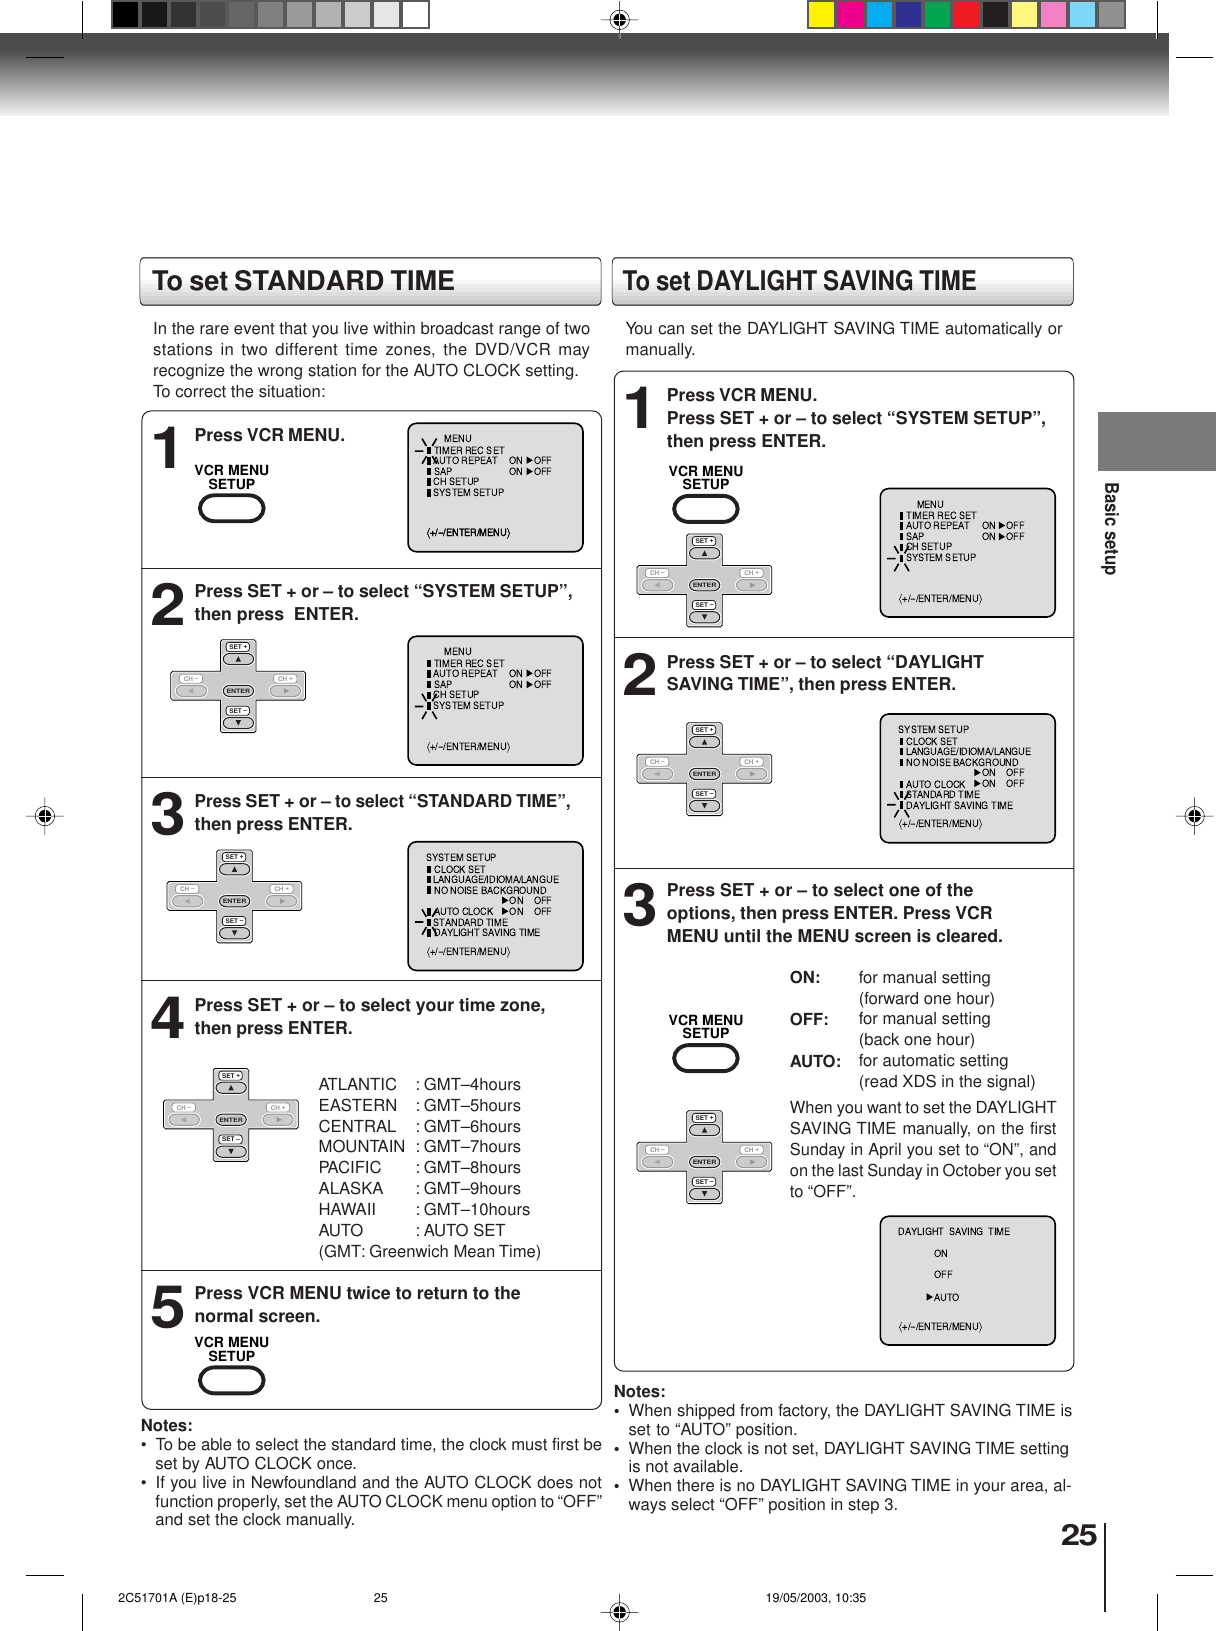 25Basic setupPress VCR MENU.1Press SET + or – to select “SYSTEM SETUP”,then press  ENTER.2Press SET + or – to select “STANDARD TIME”,then press ENTER.3Press SET + or – to select your time zone,then press ENTER.4Press VCR MENU twice to return to thenormal screen.5In the rare event that you live within broadcast range of twostations in two different time zones, the DVD/VCR mayrecognize the wrong station for the AUTO CLOCK setting.To correct the situation:Notes:• To be able to select the standard time, the clock must first beset by AUTO CLOCK once.• If you live in Newfoundland and the AUTO CLOCK does notfunction properly, set the AUTO CLOCK menu option to “OFF”and set the clock manually.Press VCR MENU.Press SET + or – to select “SYSTEM SETUP”,then press ENTER.1Press SET + or – to select “DAYLIGHTSAVING TIME”, then press ENTER.2Press SET + or – to select one of theoptions, then press ENTER. Press VCRMENU until the MENU screen is cleared.3Notes:•When shipped from factory, the DAYLIGHT SAVING TIME isset to “AUTO” position.•When the clock is not set, DAYLIGHT SAVING TIME settingis not available.•When there is no DAYLIGHT SAVING TIME in your area, al-ways select “OFF” position in step 3.When you want to set the DAYLIGHTSAVING TIME manually, on the firstSunday in April you set to “ON”, andon the last Sunday in October you setto “OFF”.ON:OFF:AUTO:for manual setting(forward one hour)for manual setting(back one hour)for automatic setting(read XDS in the signal)ATLANTIC : GMT–4hoursEASTERN : GMT–5hoursCENTRAL : GMT–6hoursMOUNTAIN : GMT–7hoursPACIFIC : GMT–8hoursALASKA : GMT–9hoursHAWAII : GMT–10hoursAUTO : AUTO SET(GMT: Greenwich Mean Time)To set DAYLIGHT SAVING TIMEYou can set the DAYLIGHT SAVING TIME automatically ormanually.To set STANDARD TIMEVCR MENUSETUPVCR MENUSETUPSET +SET –CH –CH +ENTERSET +SET –CH –CH +ENTERSET +SET –CH –CH +ENTERVCR MENUSETUPSET +SET –CH –CH +ENTERSET +SET –CH –CH +ENTERVCR MENUSETUPSET +SET –CH –CH +ENTER  2C51701A (E)p18-25 19/05/2003, 10:3525